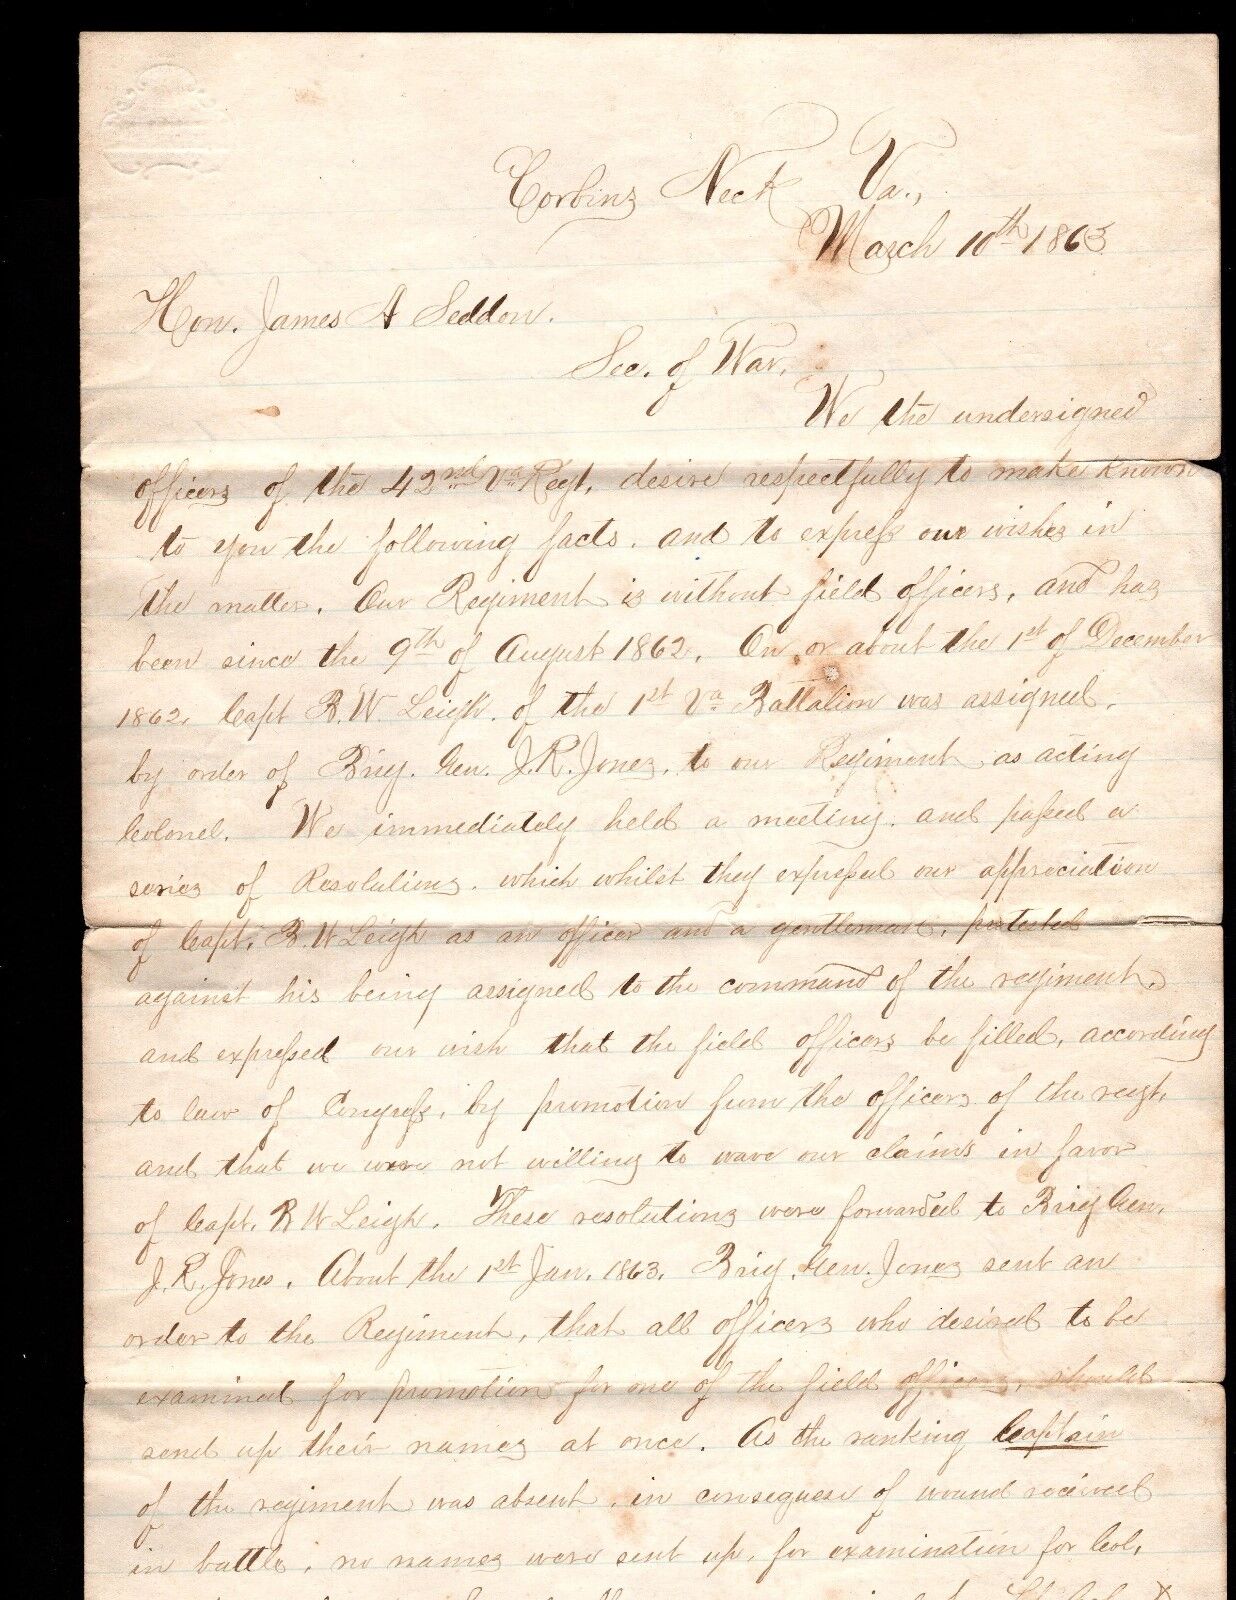 42nd Virginia Corbin\'s Neck 3/10/1863 Signed 25 Officers 2 Confederate Generals 